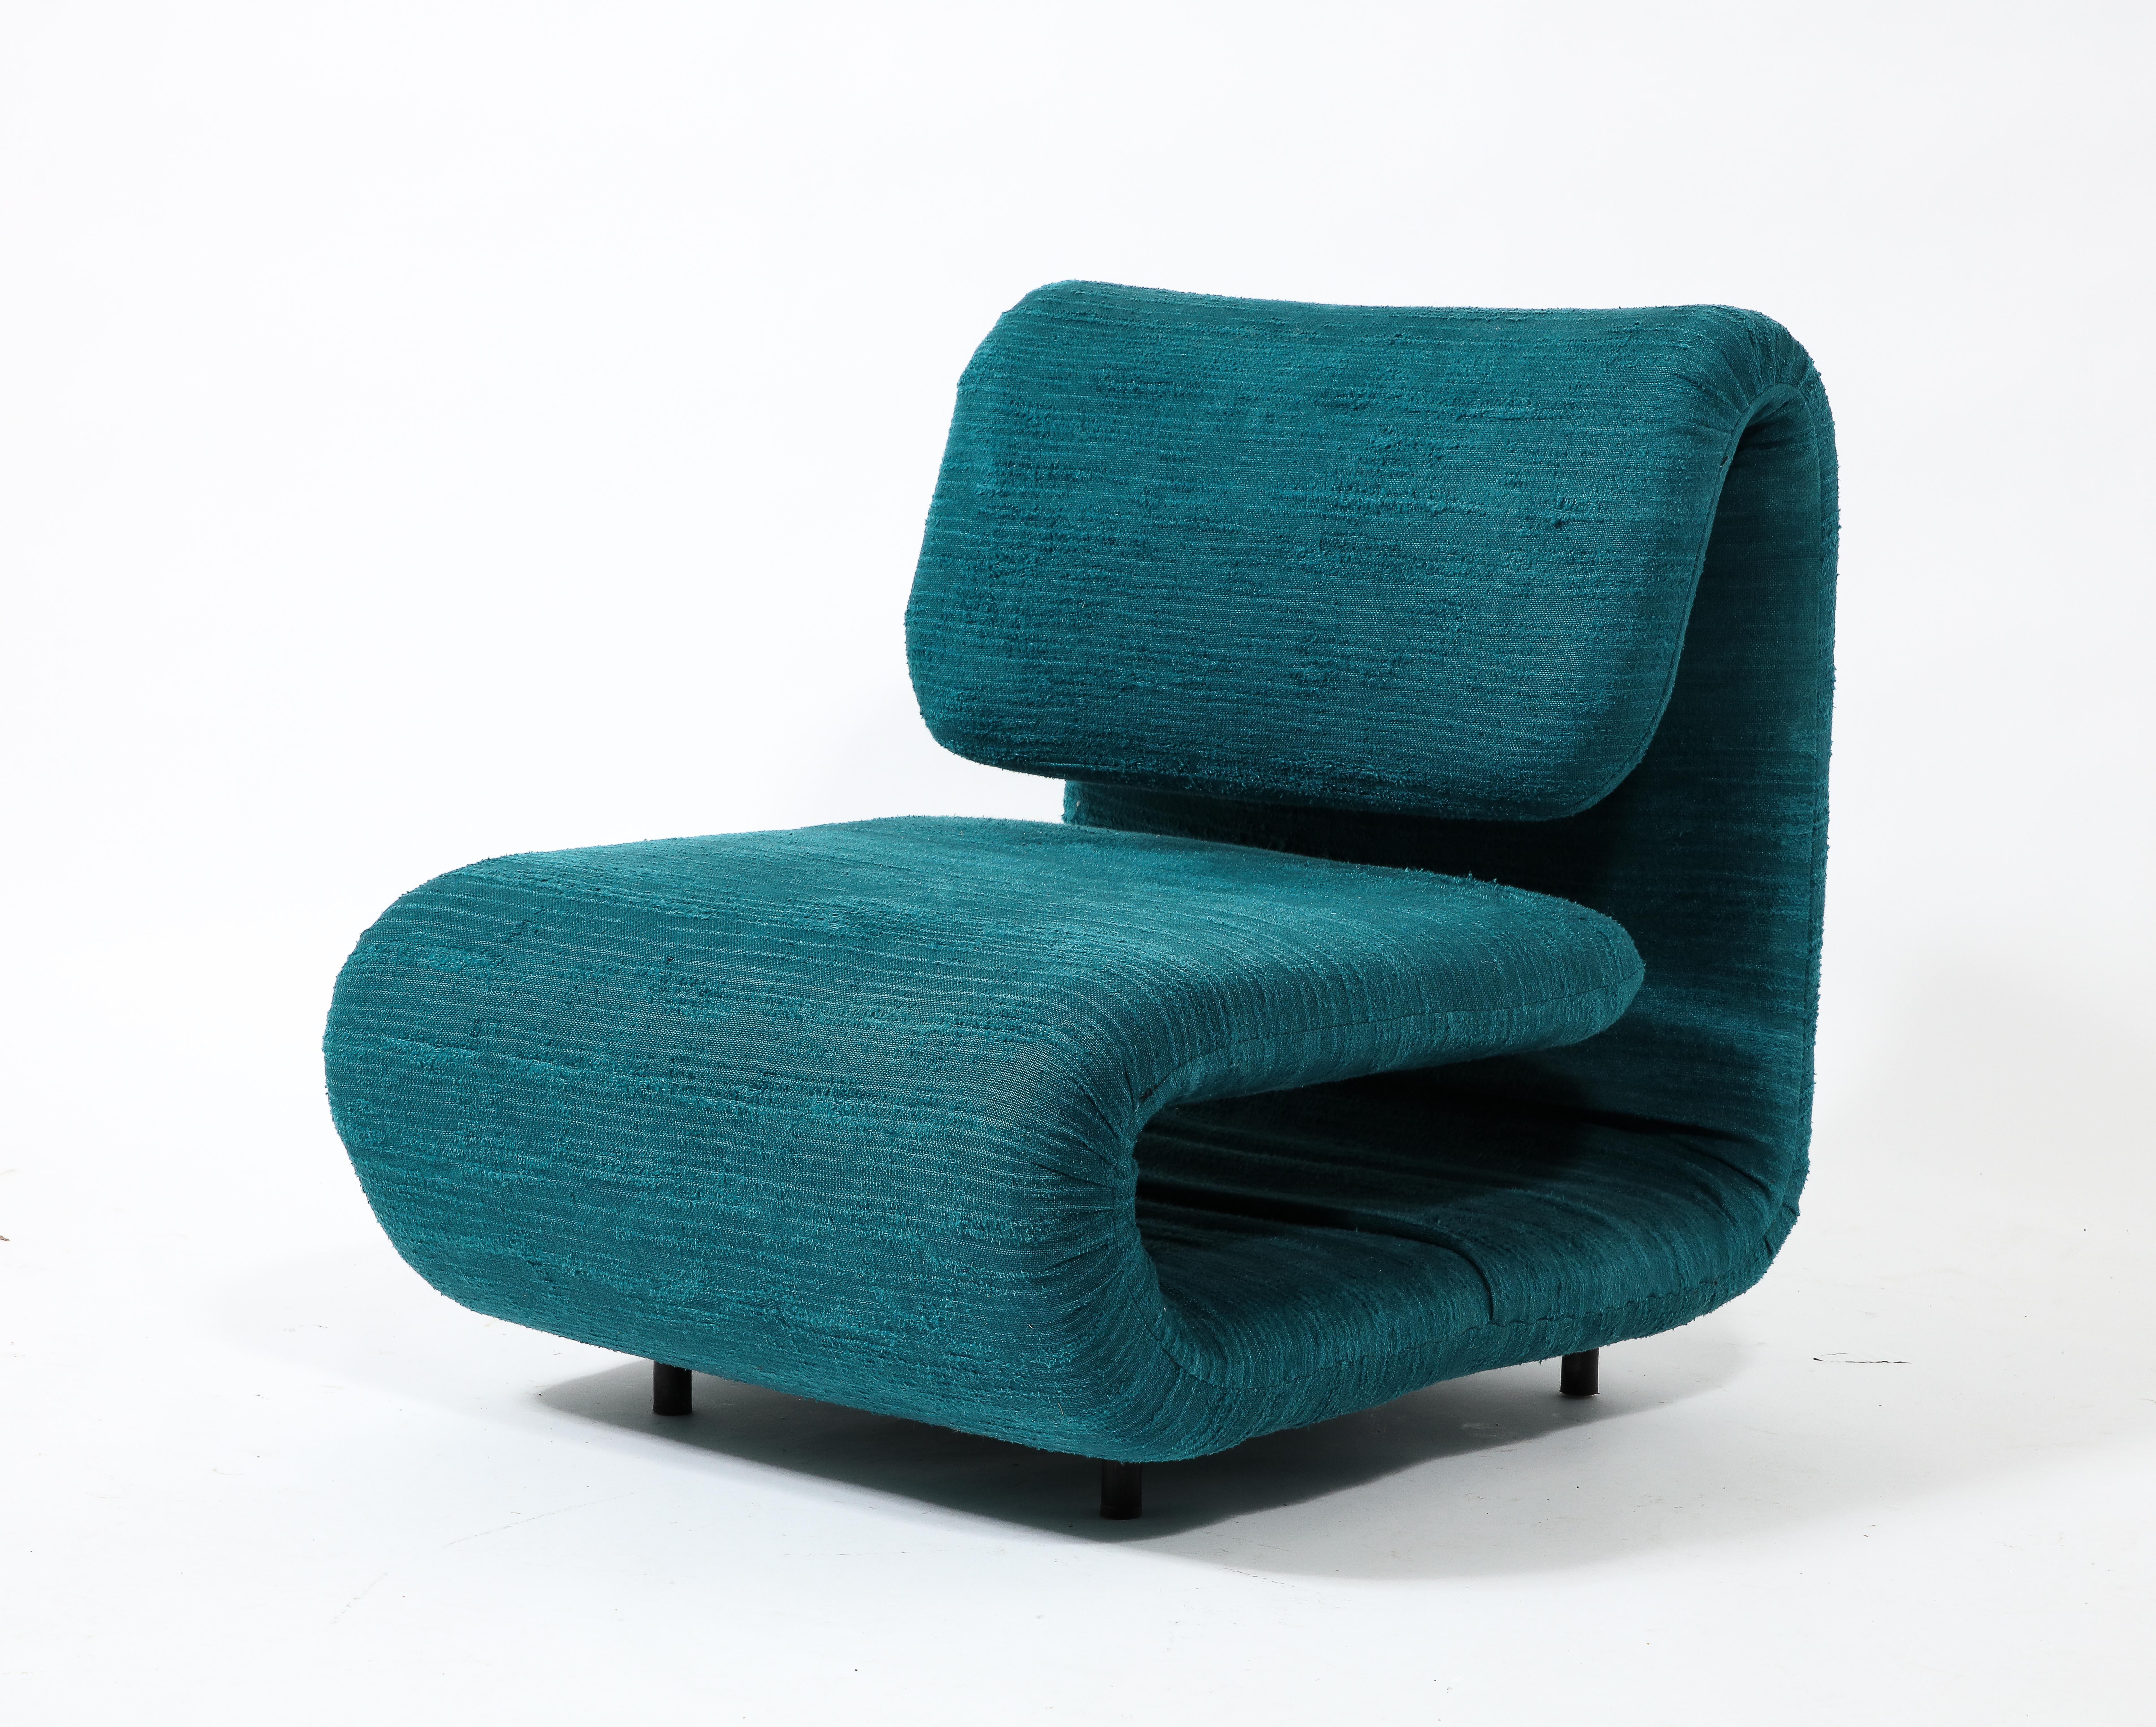 Etienne-Henri Martin Pair of 1500 Slipper Lounge Chairs in Teal, France 1960's In Good Condition For Sale In New York, NY